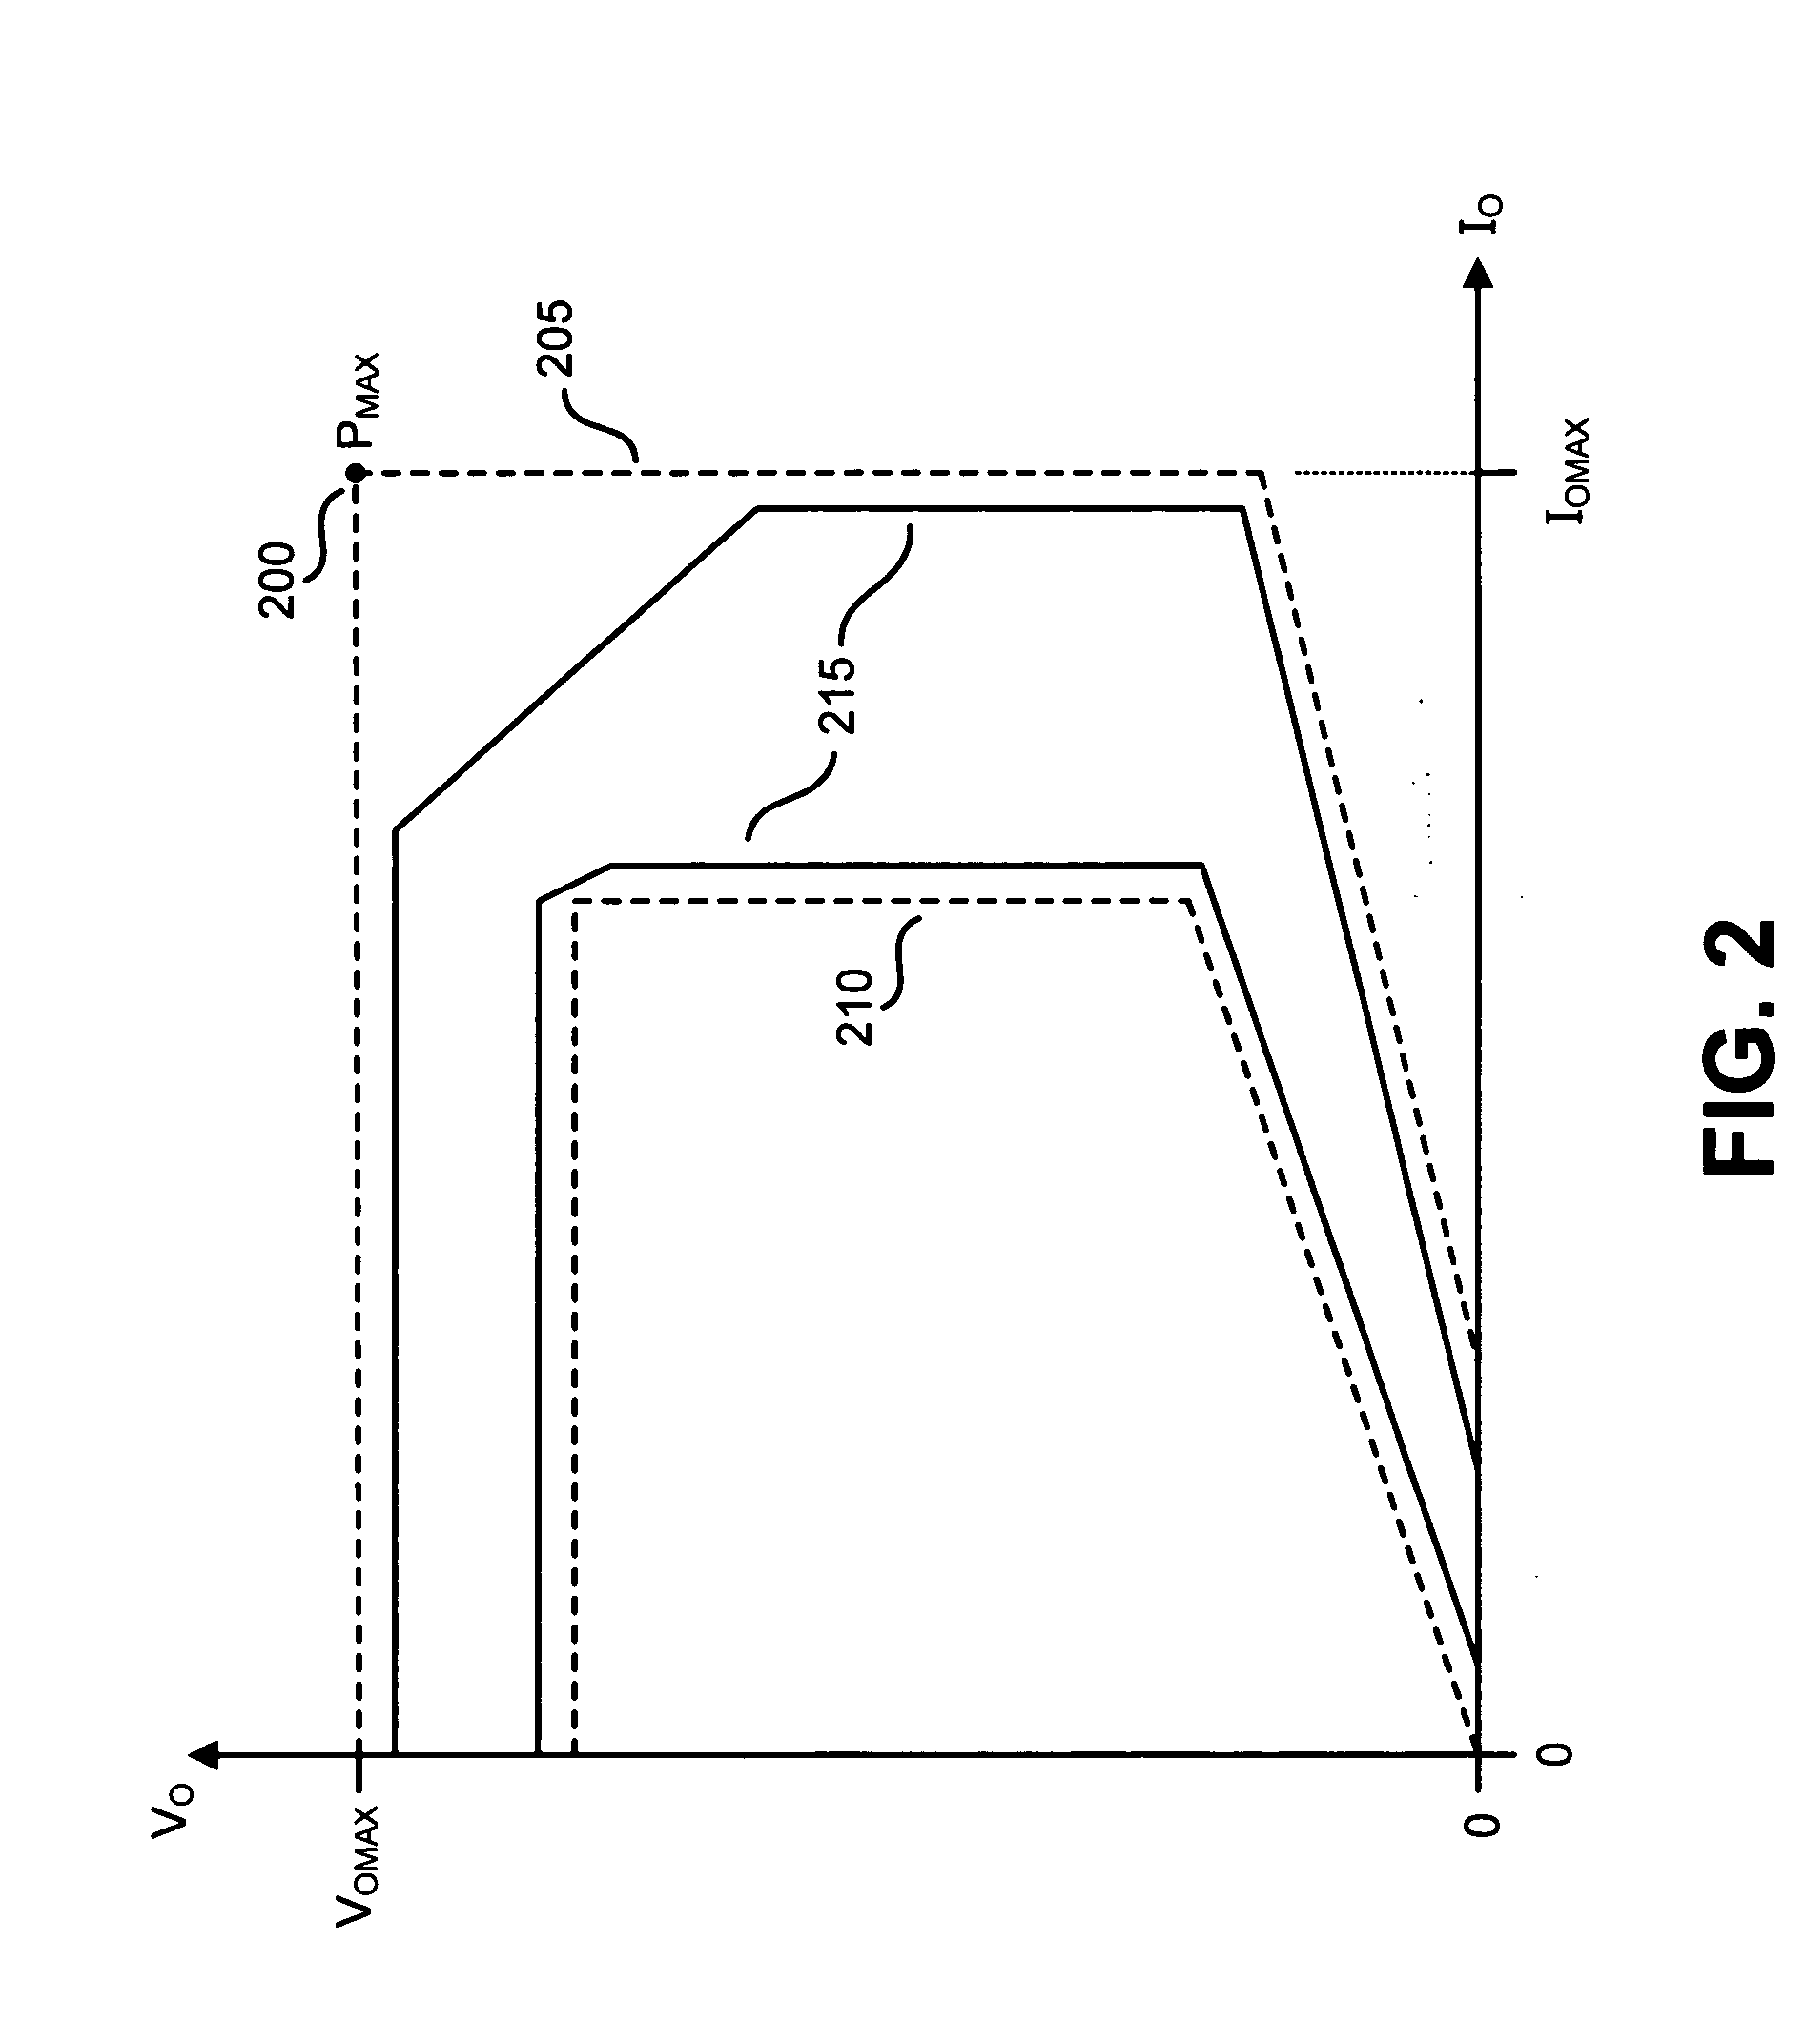 Method and apparatus to control output power from a switching power supply